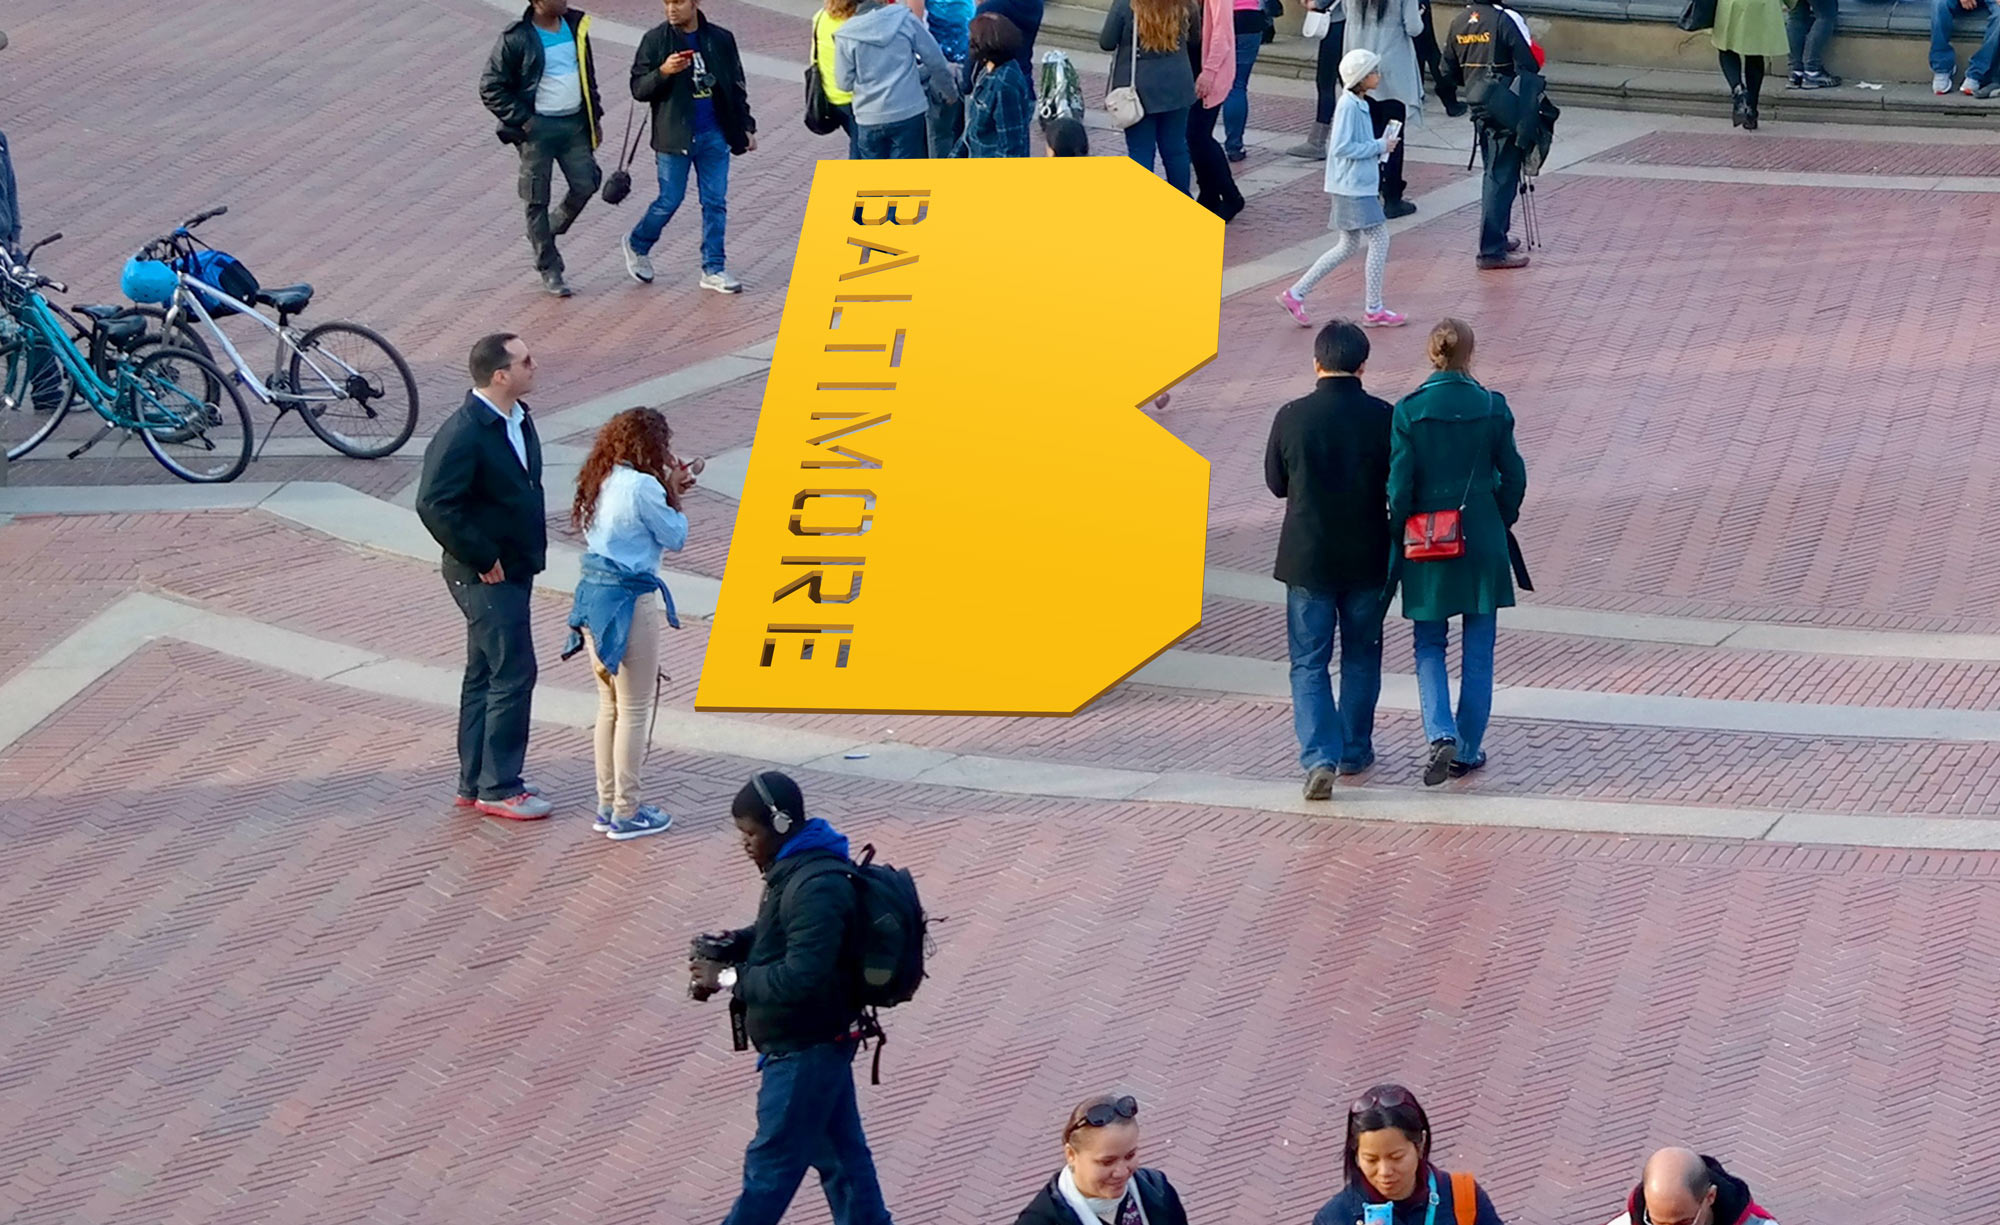 Photo rendering of a sculptural B-shaped signage proposed as part of a new brand for the city of Baltimore